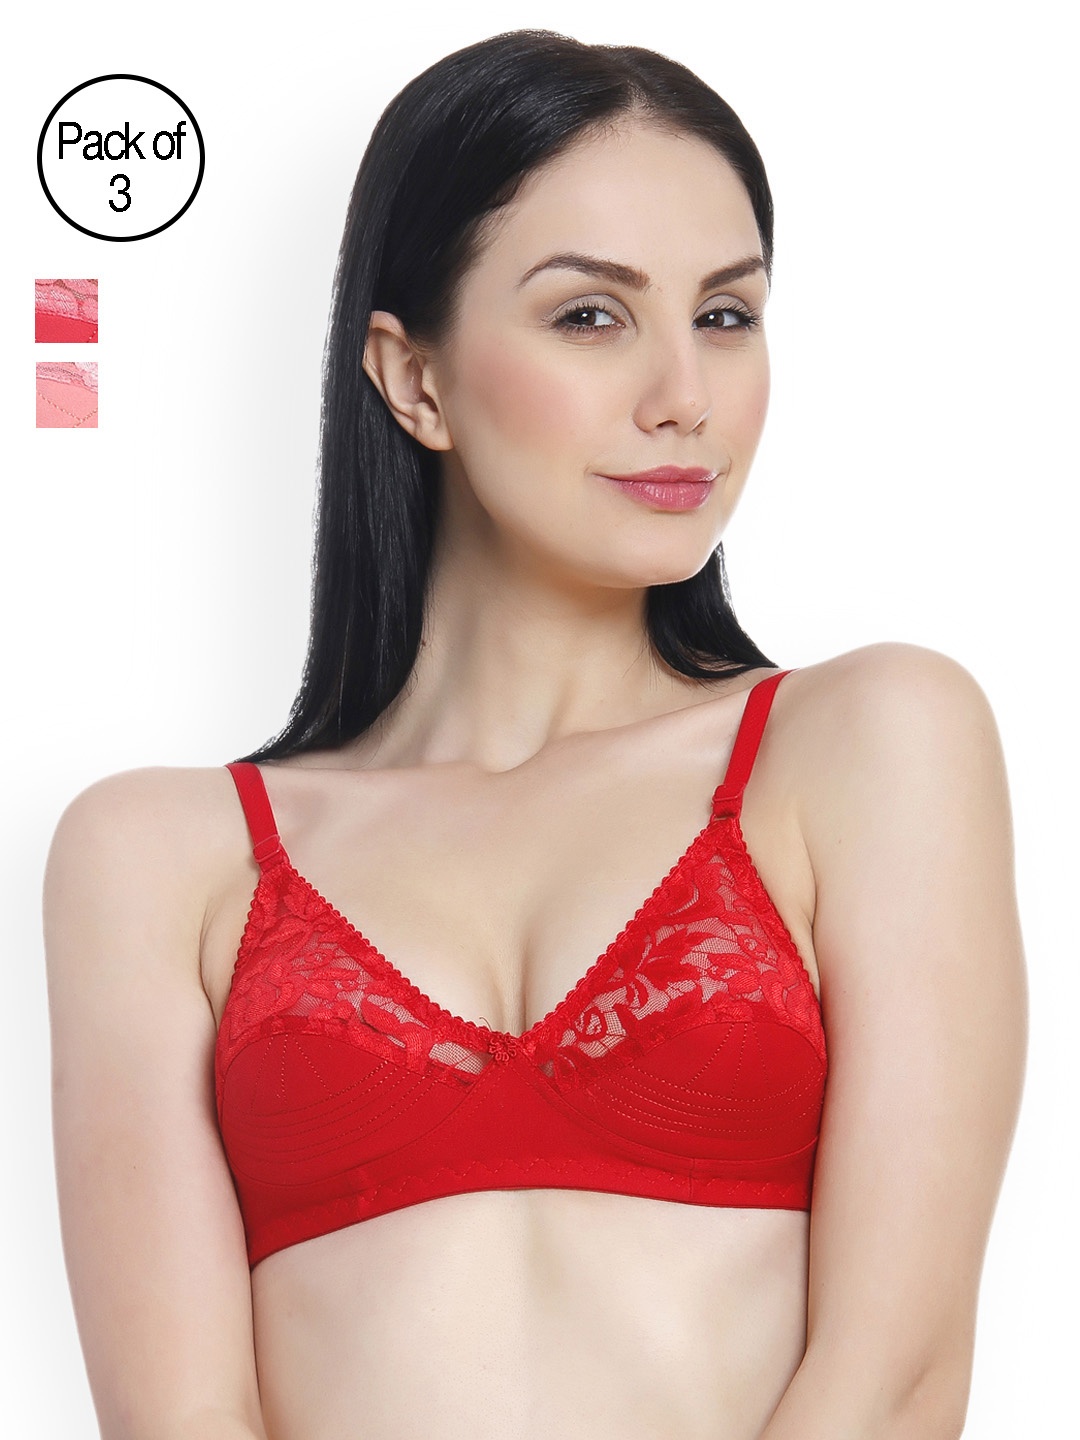 

Innocence Pack of 3 Solid Non-Wired Non-Padded Bra BBAPLIN44514_40, Coral